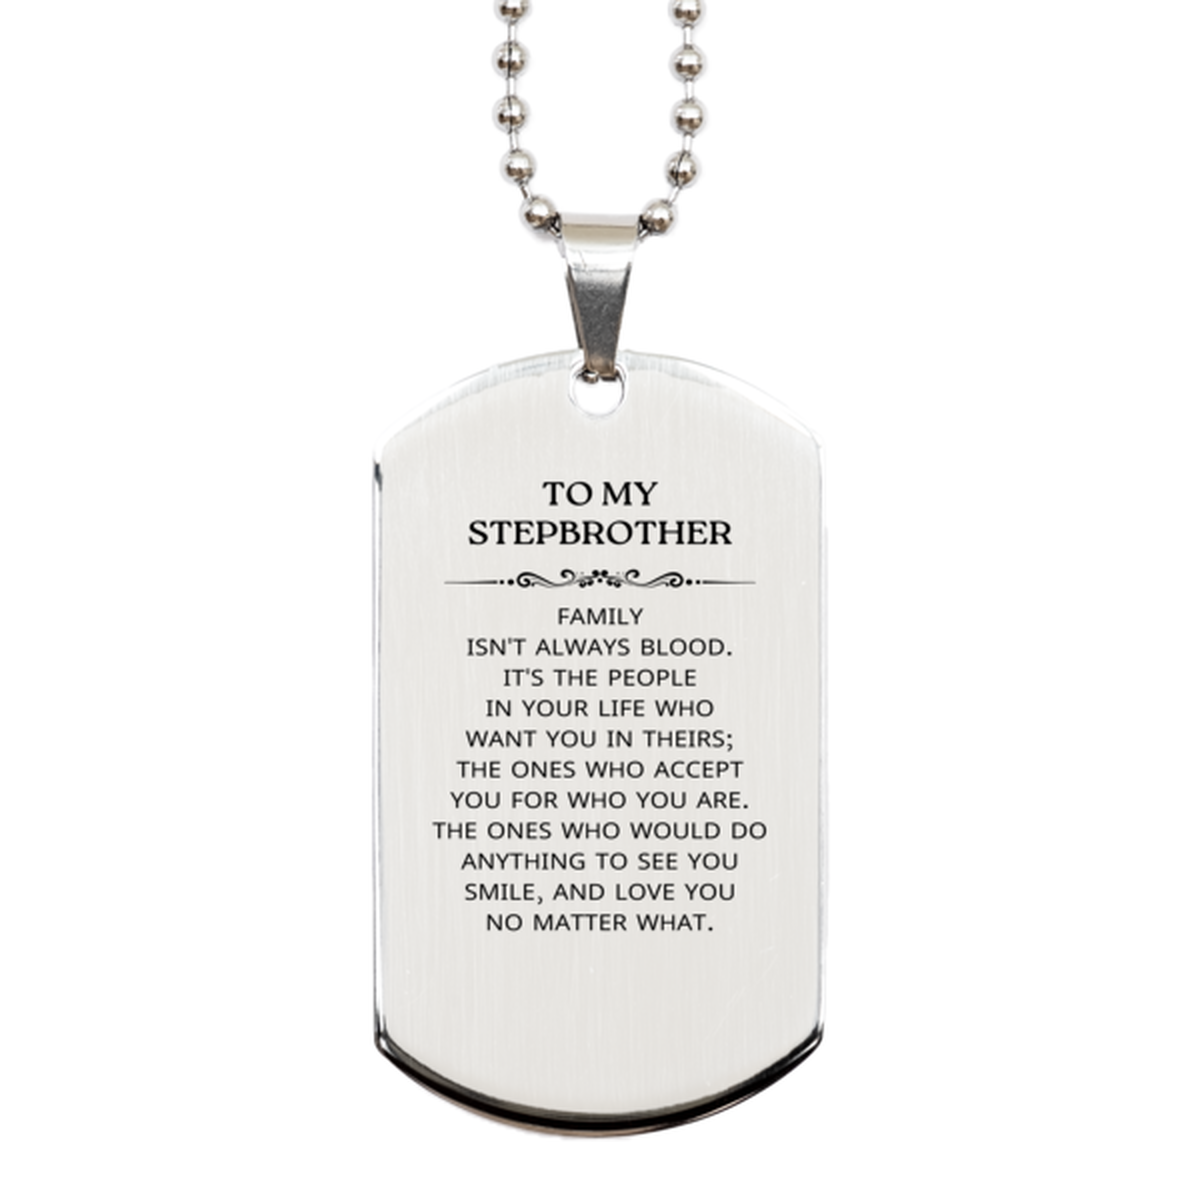 To My Stepbrother Gifts, Family isn't always blood, Stepbrother Silver Dog Tag, Birthday Christmas Unique Present For Stepbrother